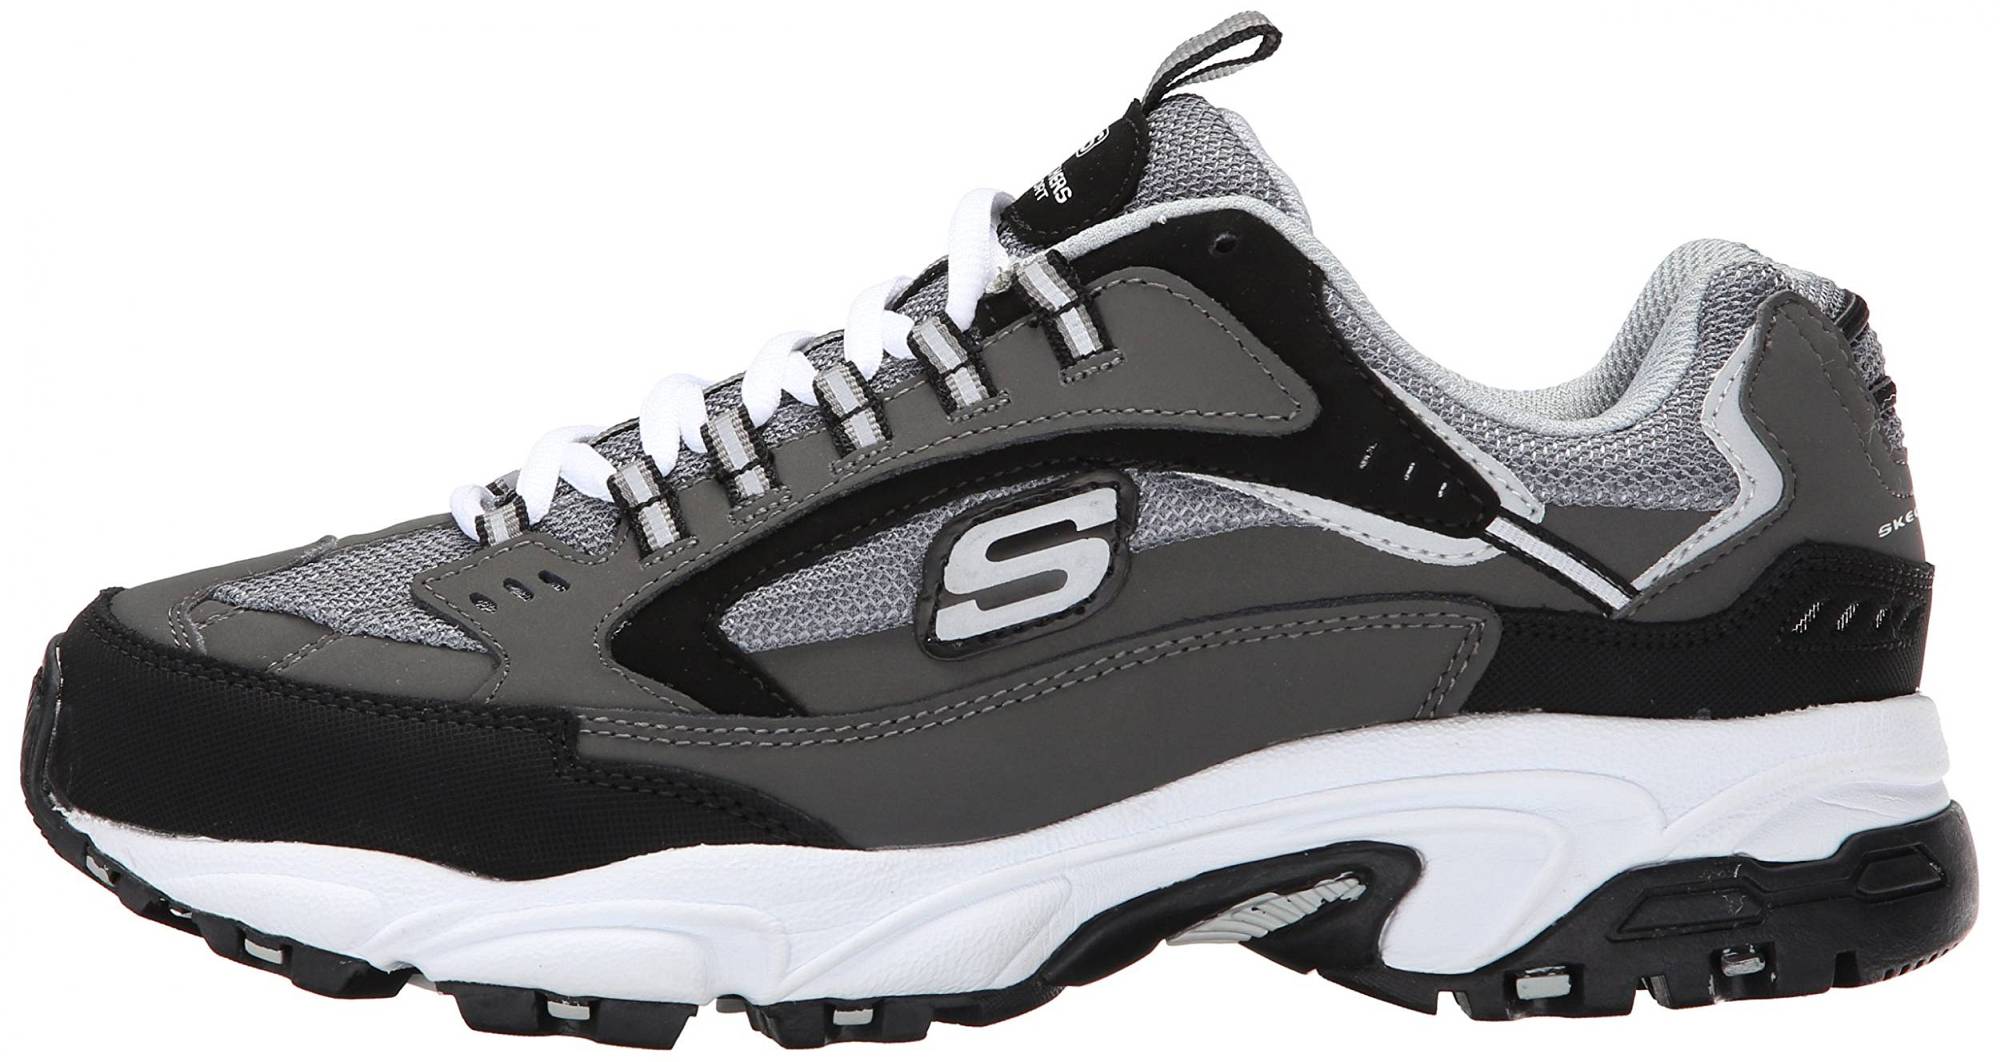 Skechers Stamina - Nuovo – Shoes Reviews & Reasons To Buy